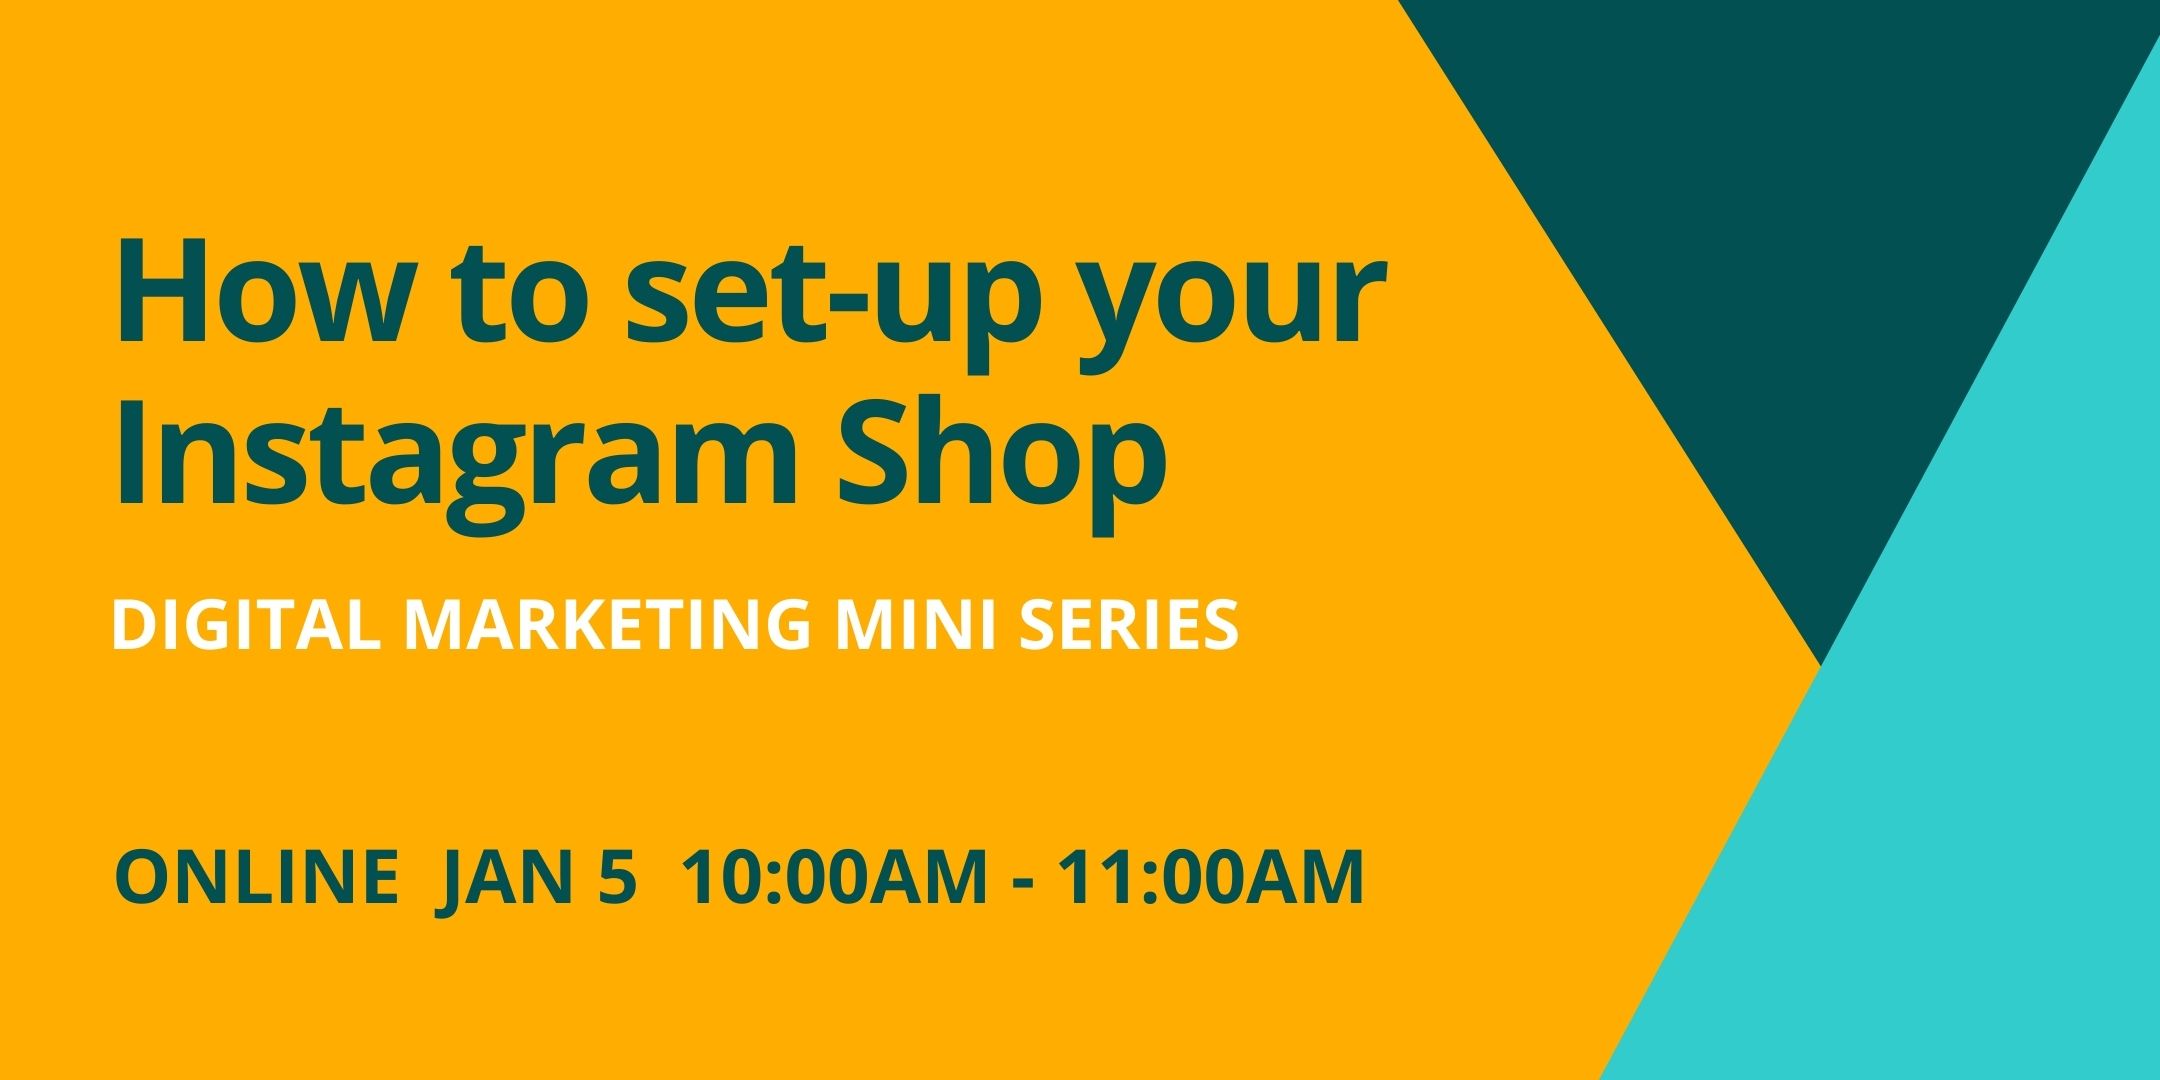 You are currently viewing Digital Marketing: How to set-up your Instagram Shop – Webinar Jan 5